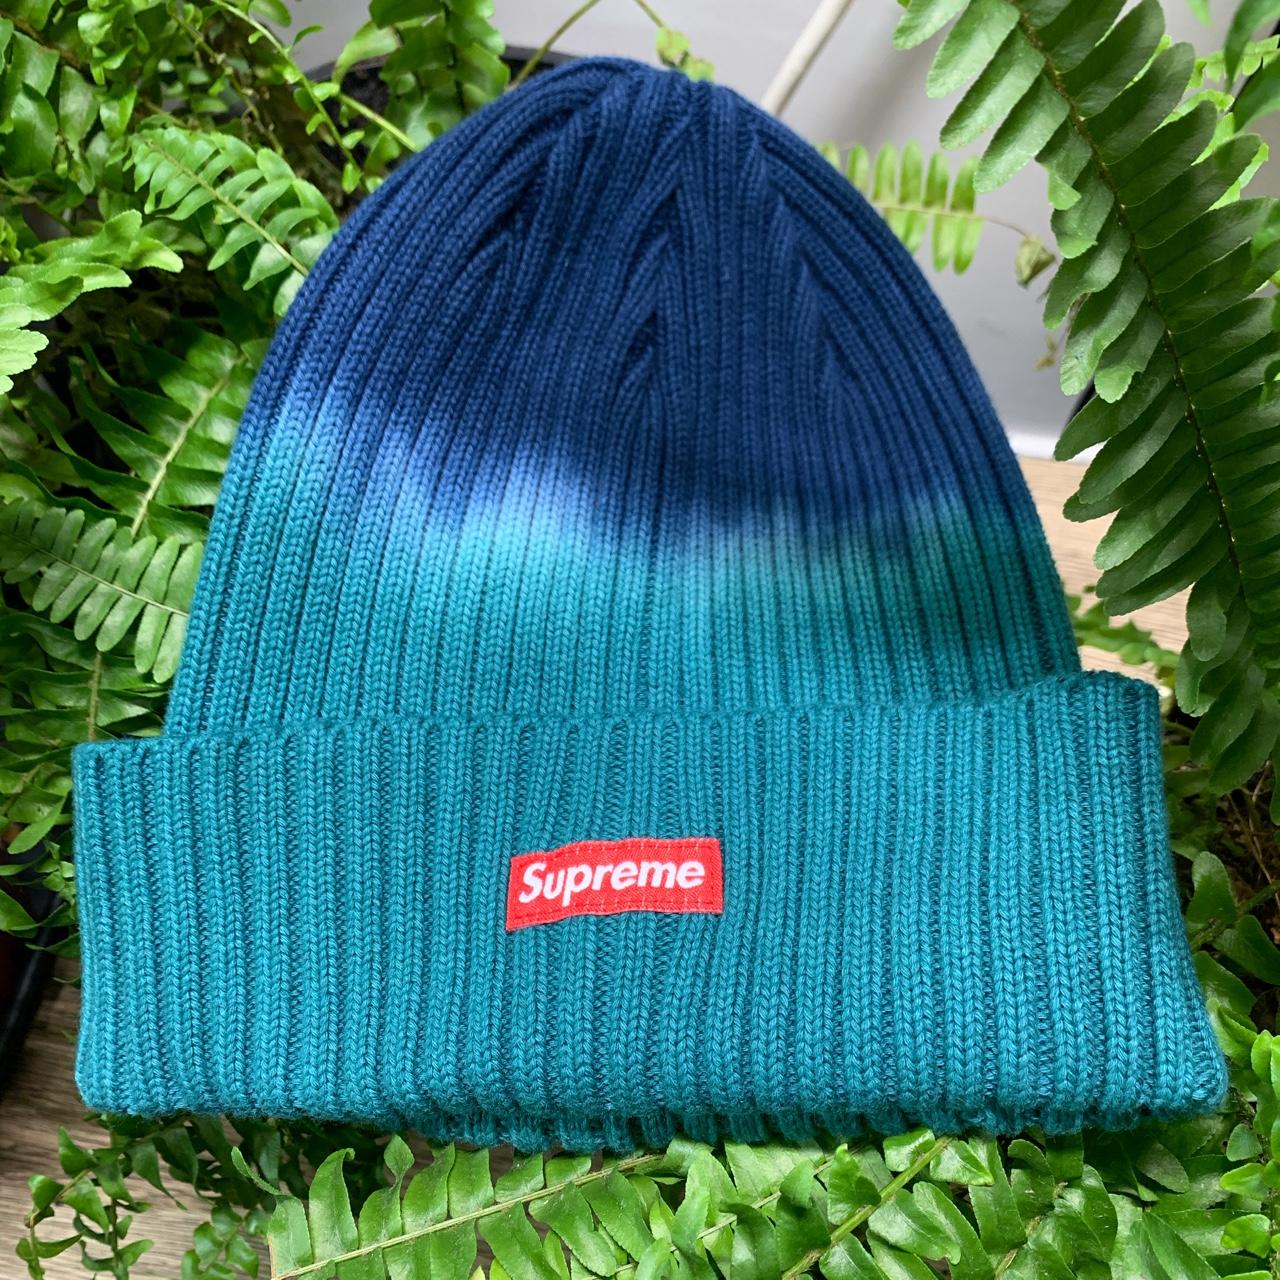 Super dope red Supreme beanie with metal - Depop